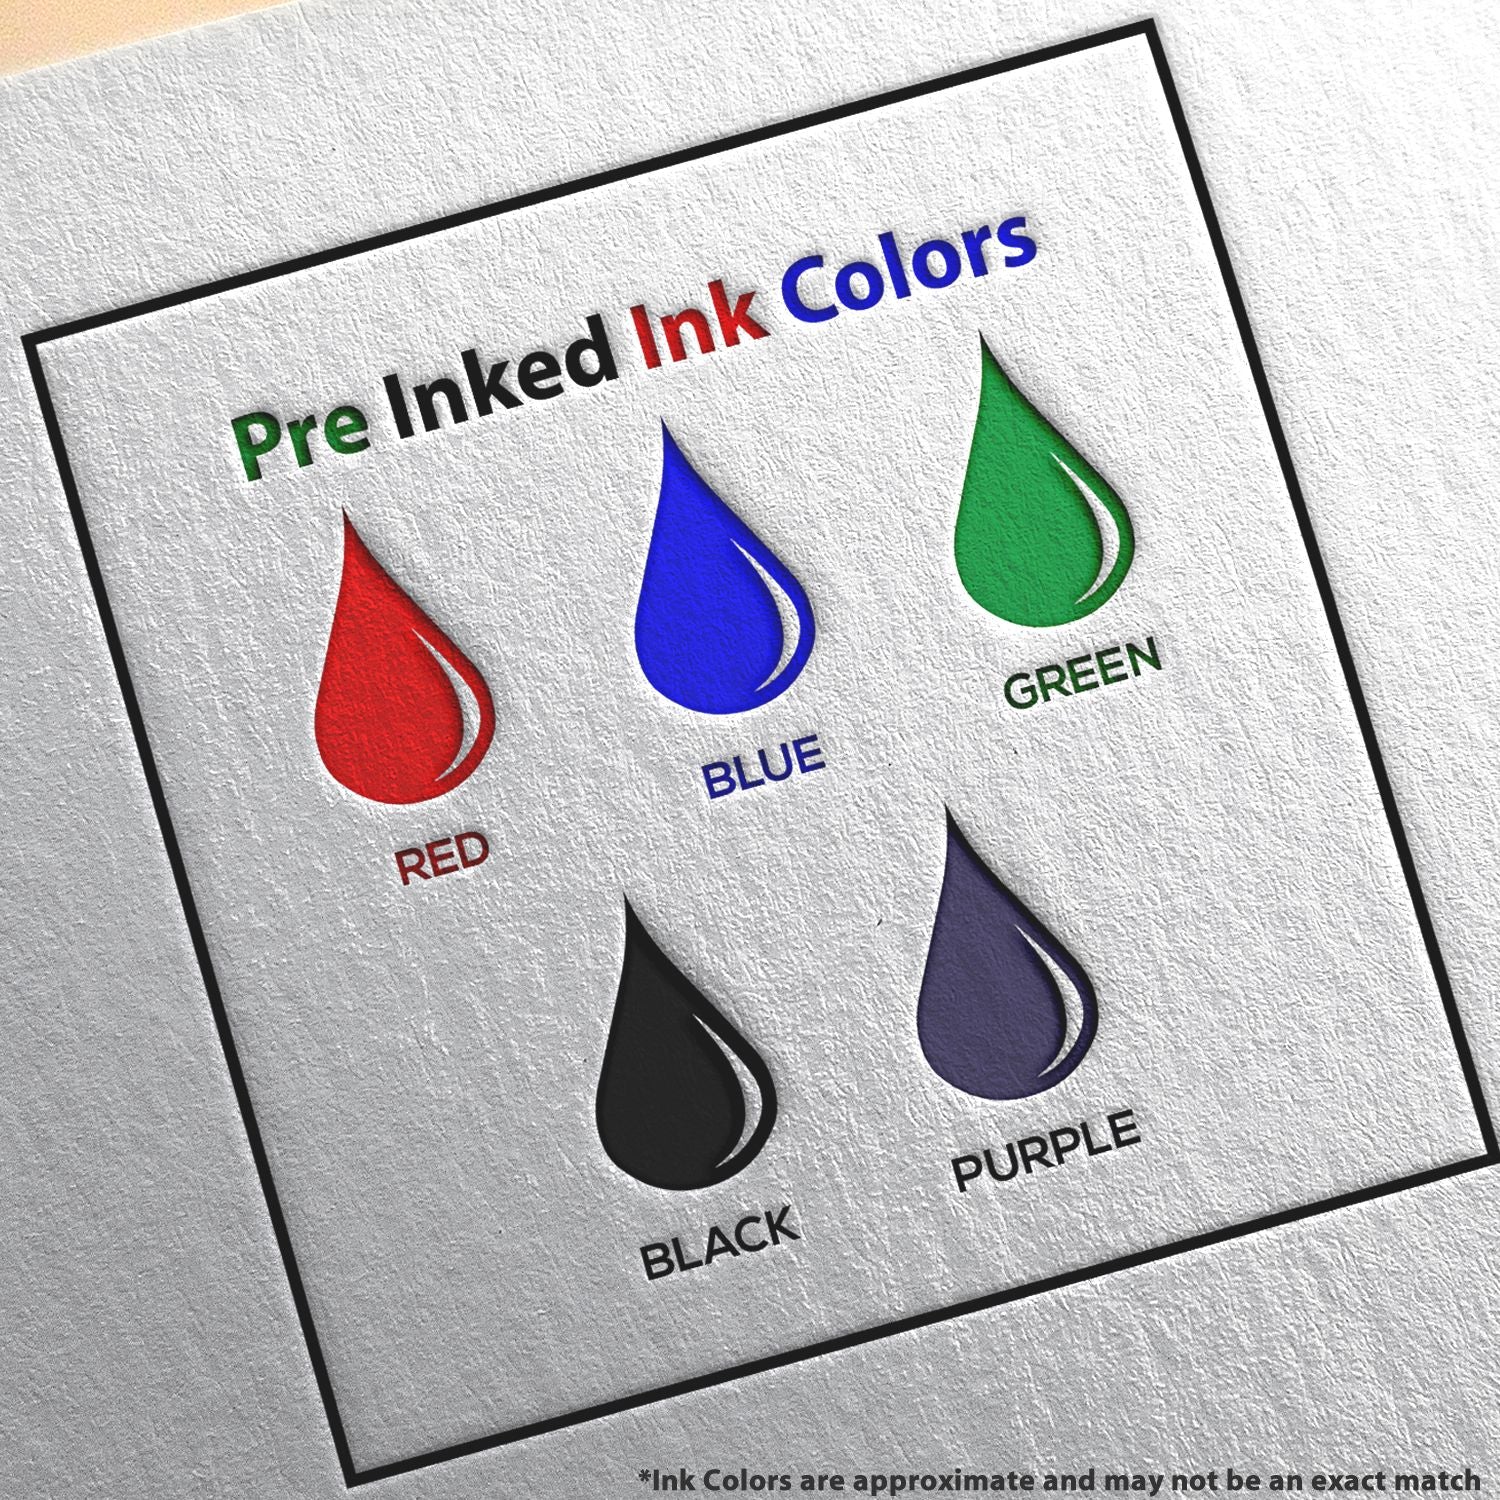 A picture showing the different ink colors or hues available for the Slim Pre-Inked North Carolina Architect Seal Stamp product.